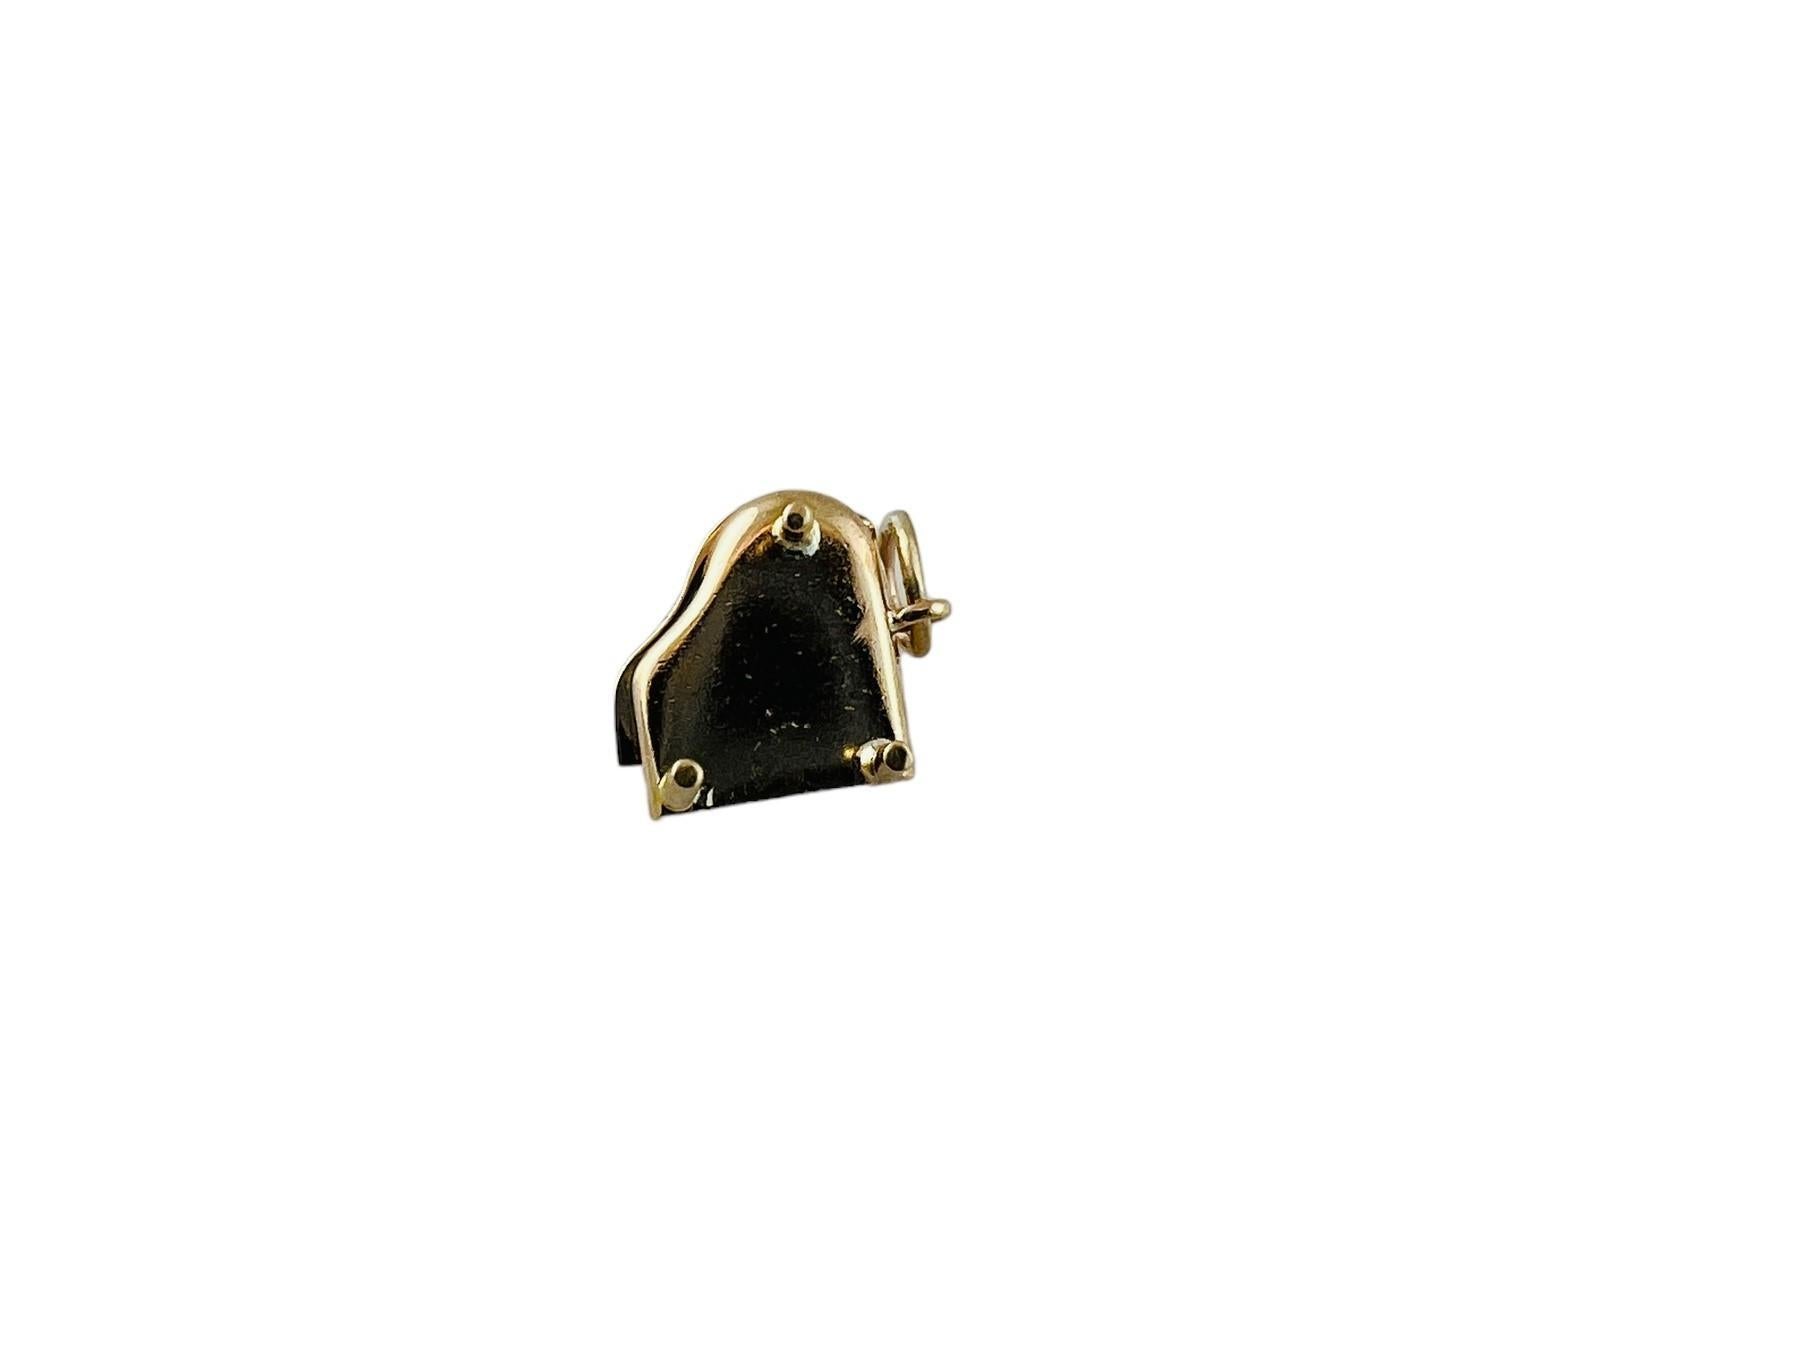 14K Yellow Gold Baby Grand Piano Charm Pendant #15613 For Sale 2